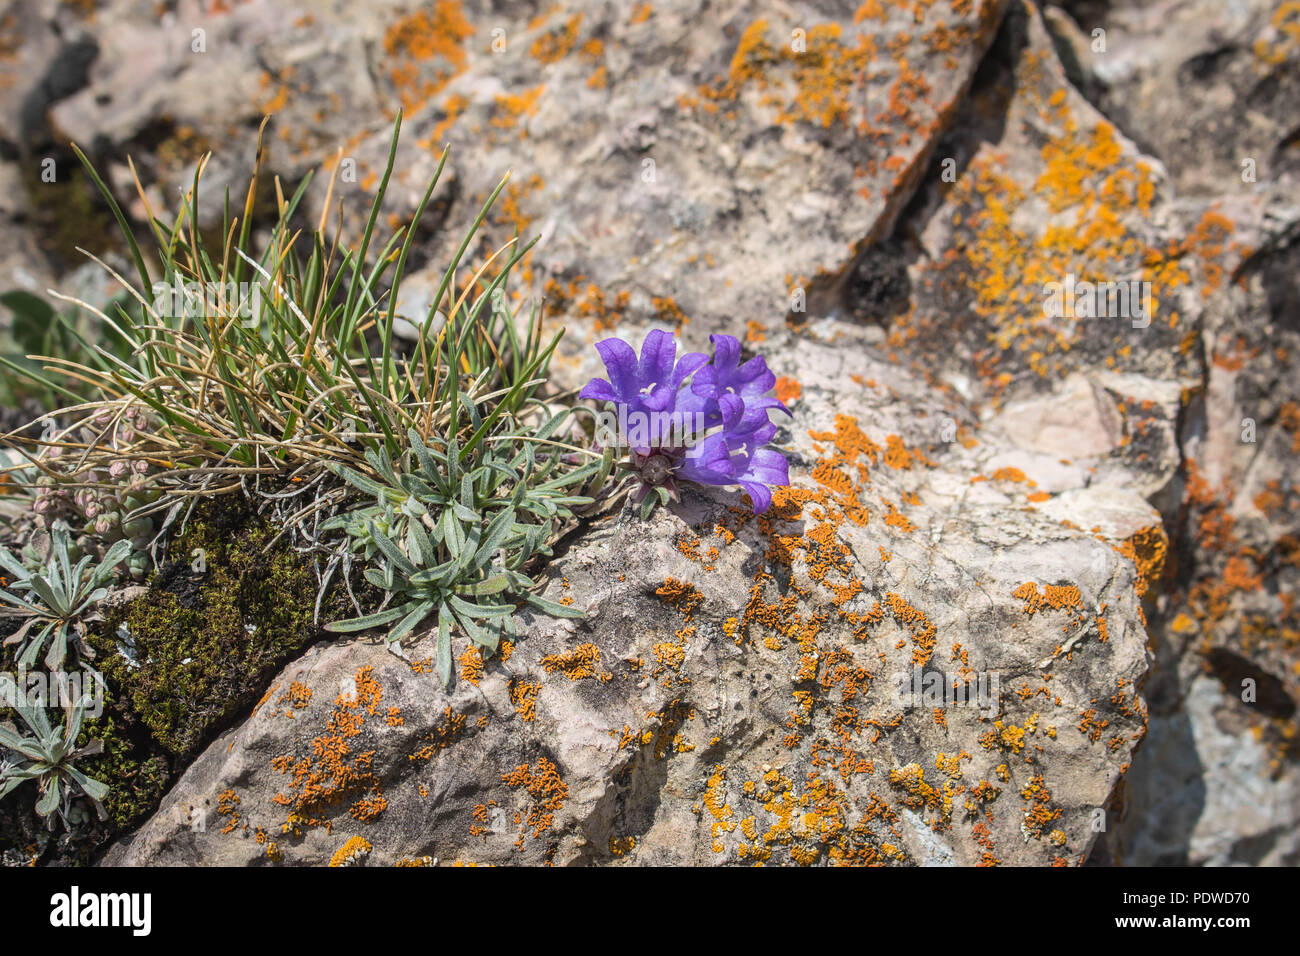 Violet flowers of Edraianthus at the Sharr mountains ridge in Kosovo, Serbia Stock Photo